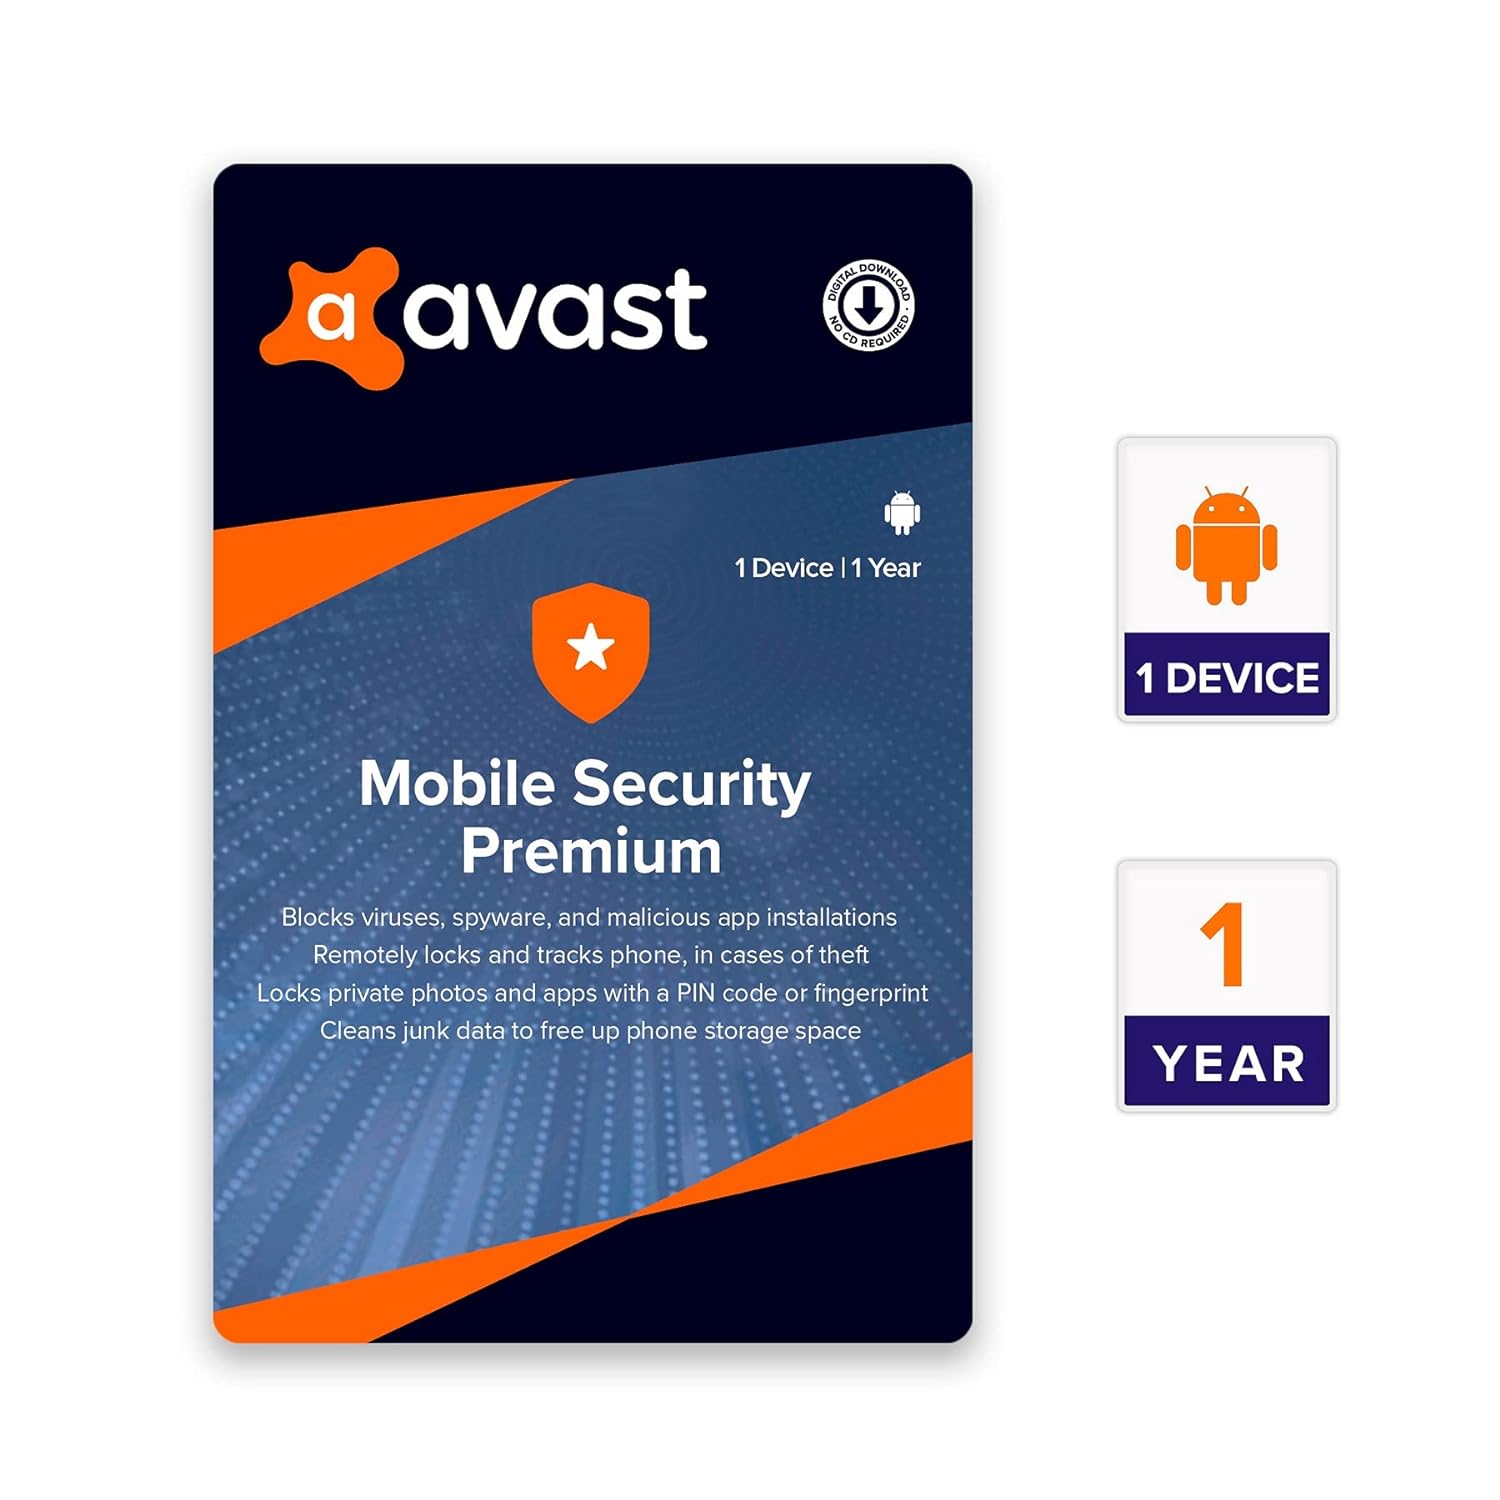 Avast Ultimate Mobile Security Premium for Android 2023 Key (1 Year / 1 Device) 7.41$